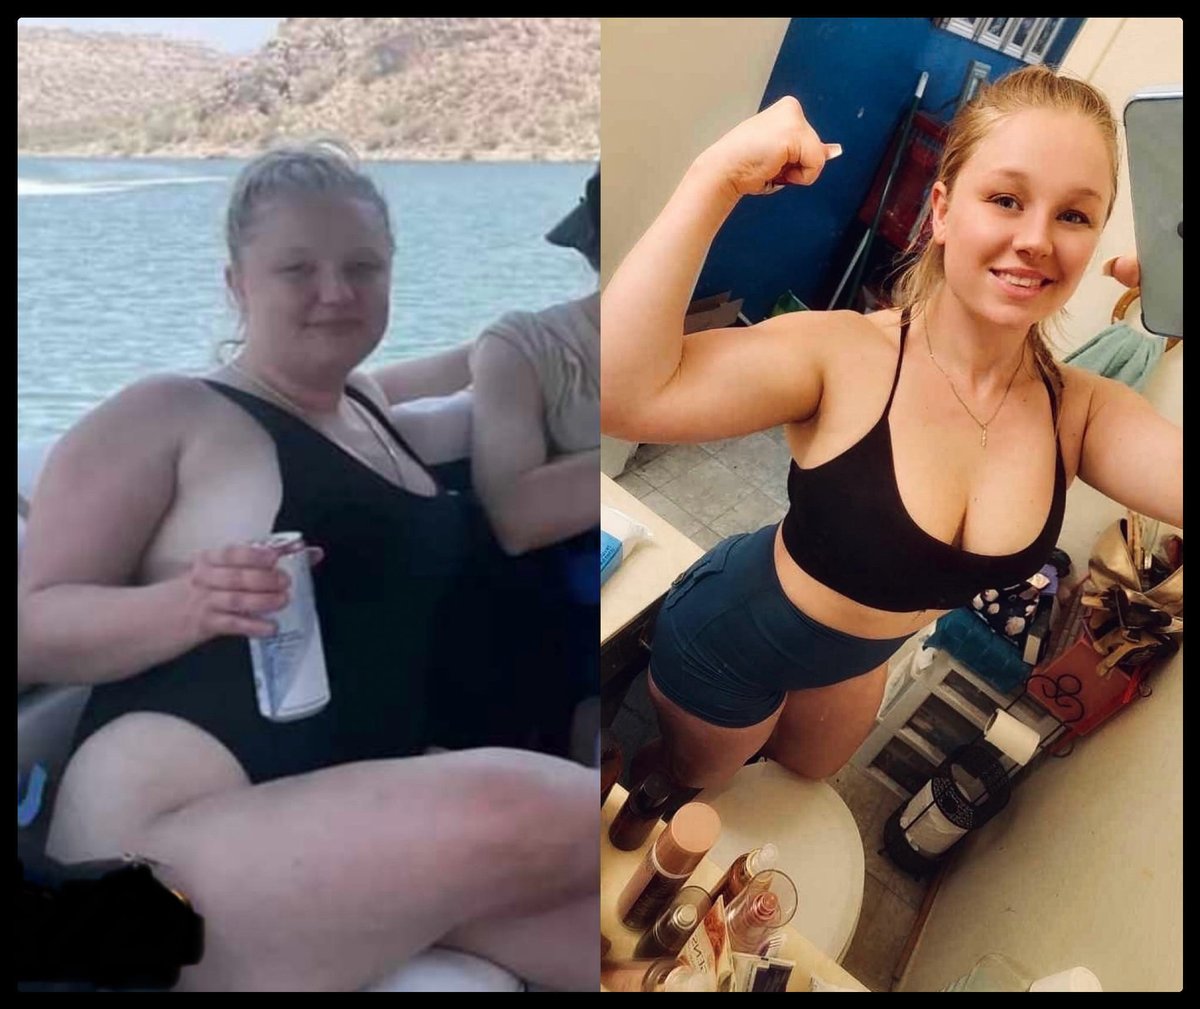 I decided it was time to show some progress ive made over time. I can say I am so happy I finally took the leap to a healthy, fit lifestyle and have stayed with it! Learning to add in weight lifting into a routine has made a huge difference! Just wanted to share my results so